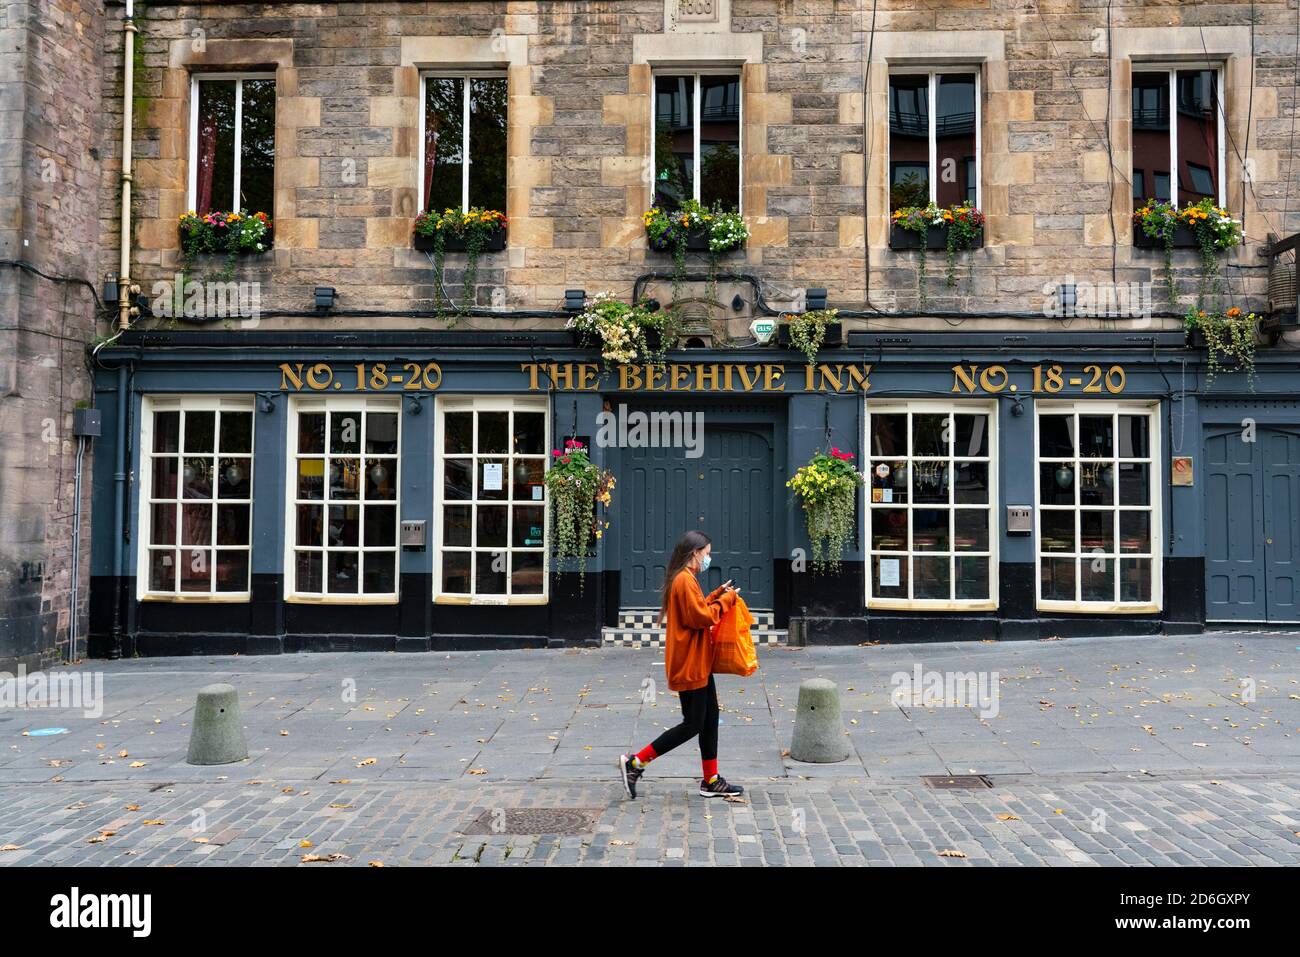 Edinburgh, Scotland, UK. 17 October 2020. Saturday afternoon in Edinburgh city centre during 16 day circuit breaker lockdown and bars are closed but cafes remain open. Streets in the Old town are very quiet and reminiscent of the eerie emptiness seen during the full lockdown earlier this year. The Beehive Inn is closed in The Grassmarket. Iain Masterton/Alamy Live News Stock Photo